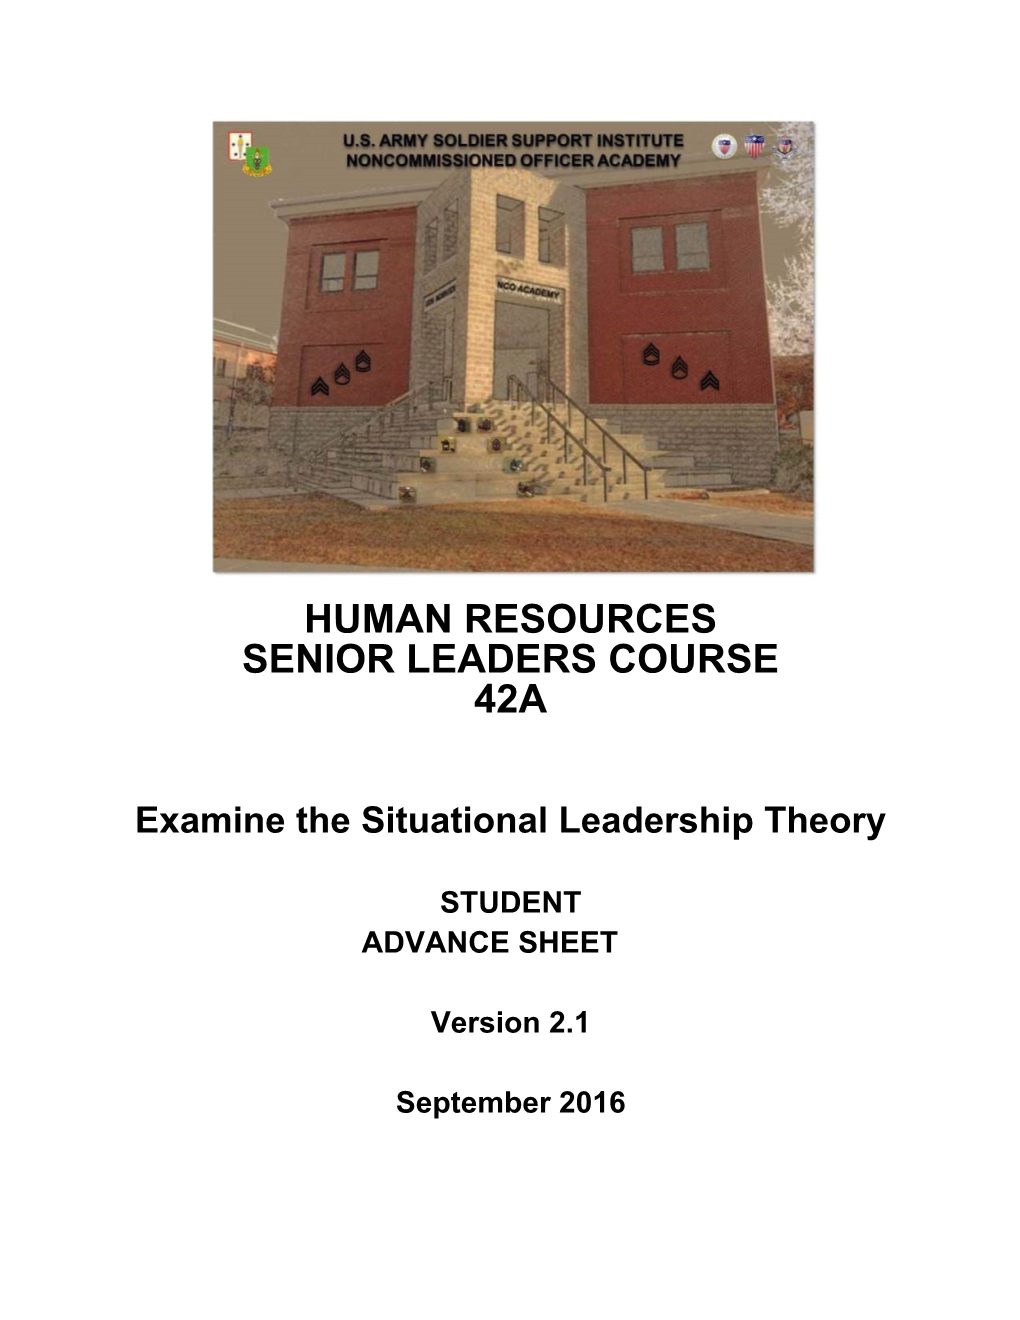 Examine The Situational Leadership Theory Advance Sheet